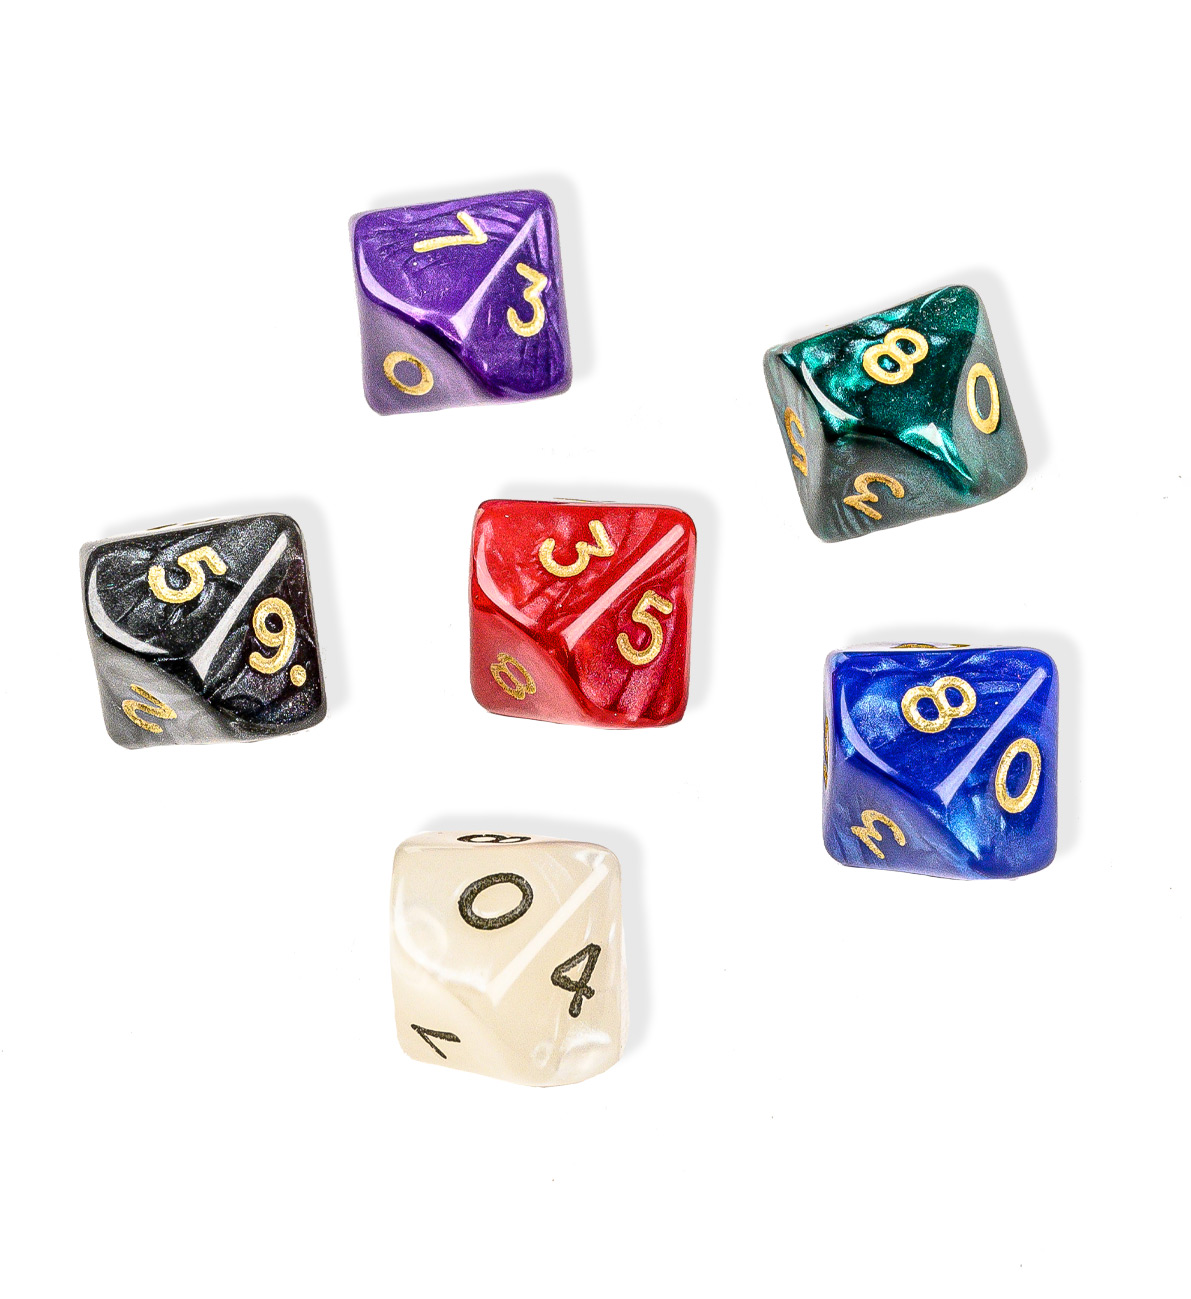 Dice, 10 sided, pearl, 50 pieces in polybag